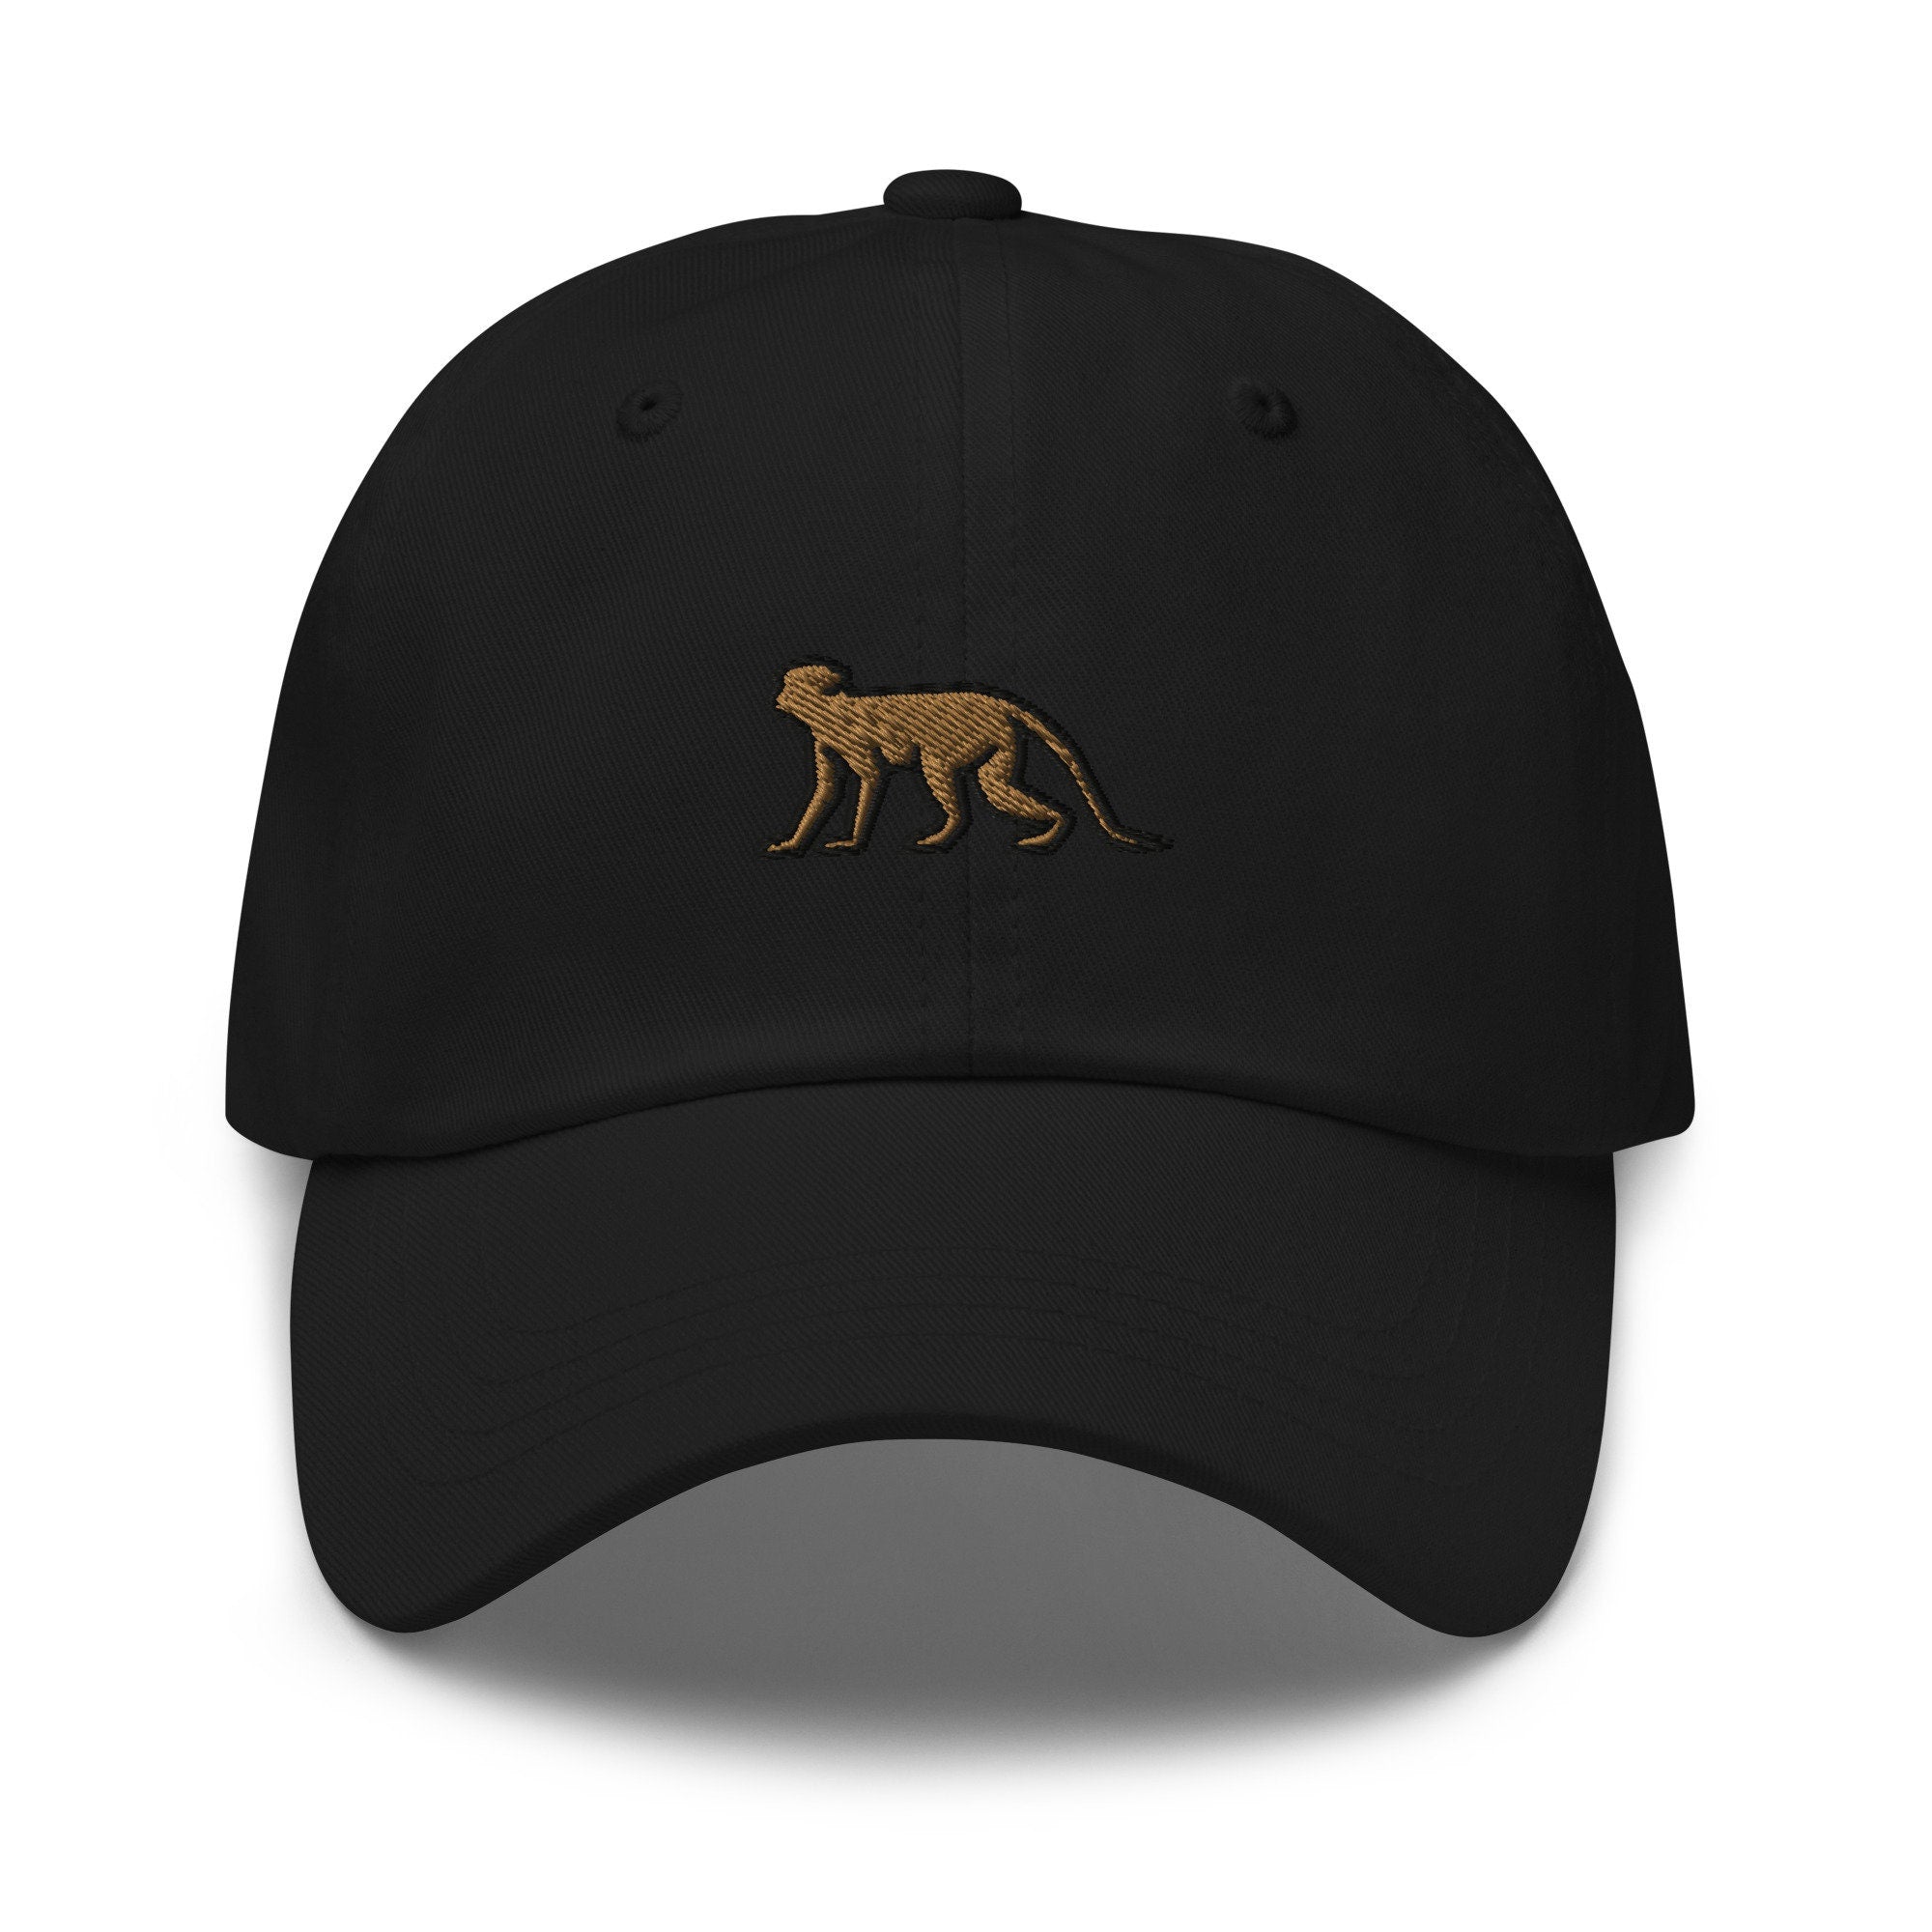 Monkey Embroidered Dad Hat